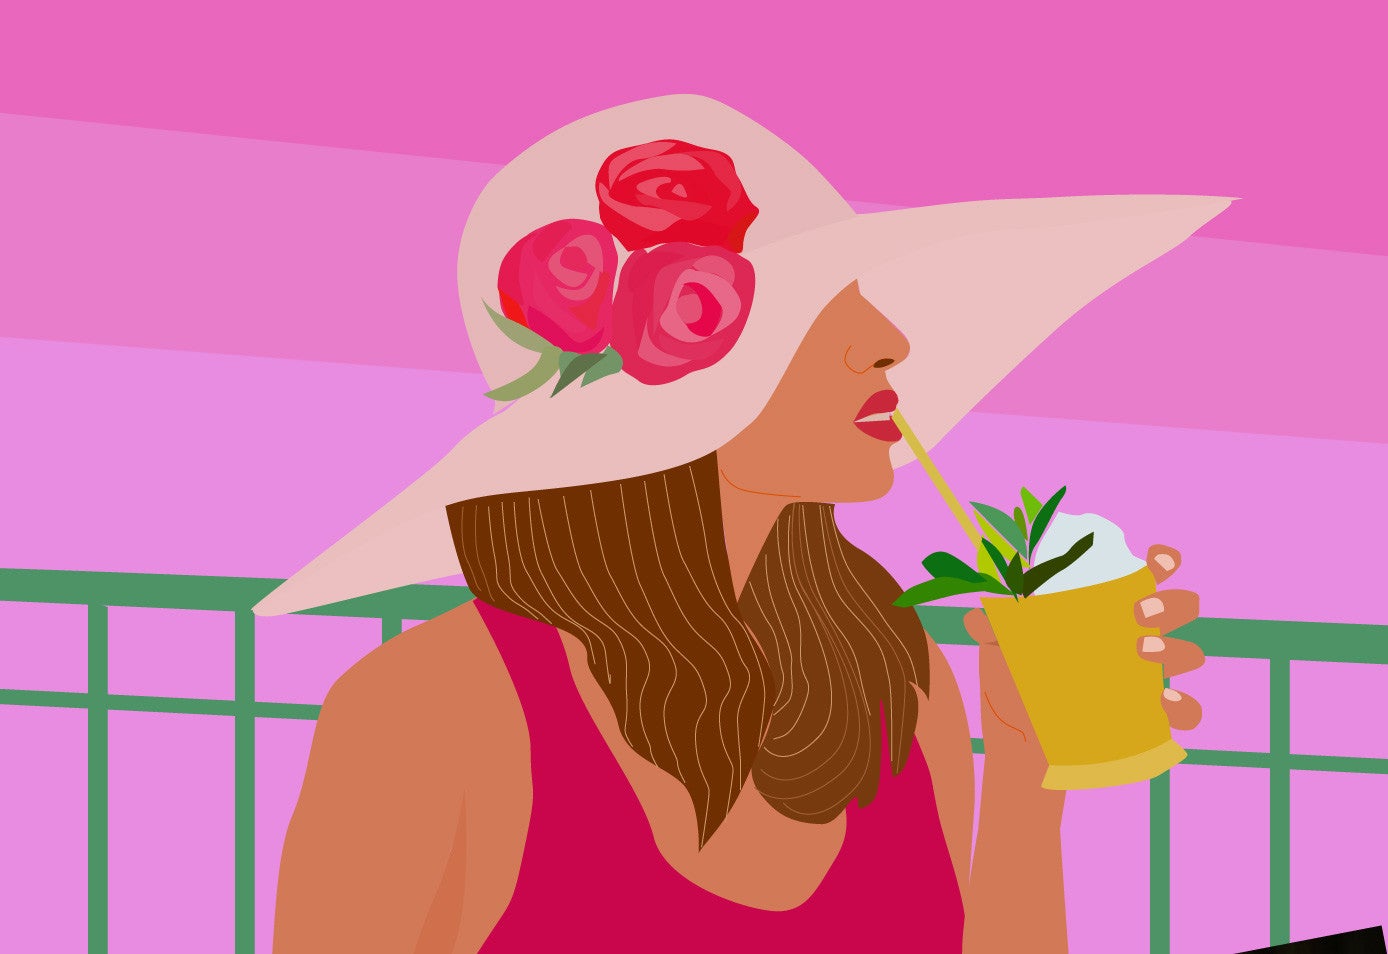 Fun Ideas for a Last-Minute Kentucky Derby Party